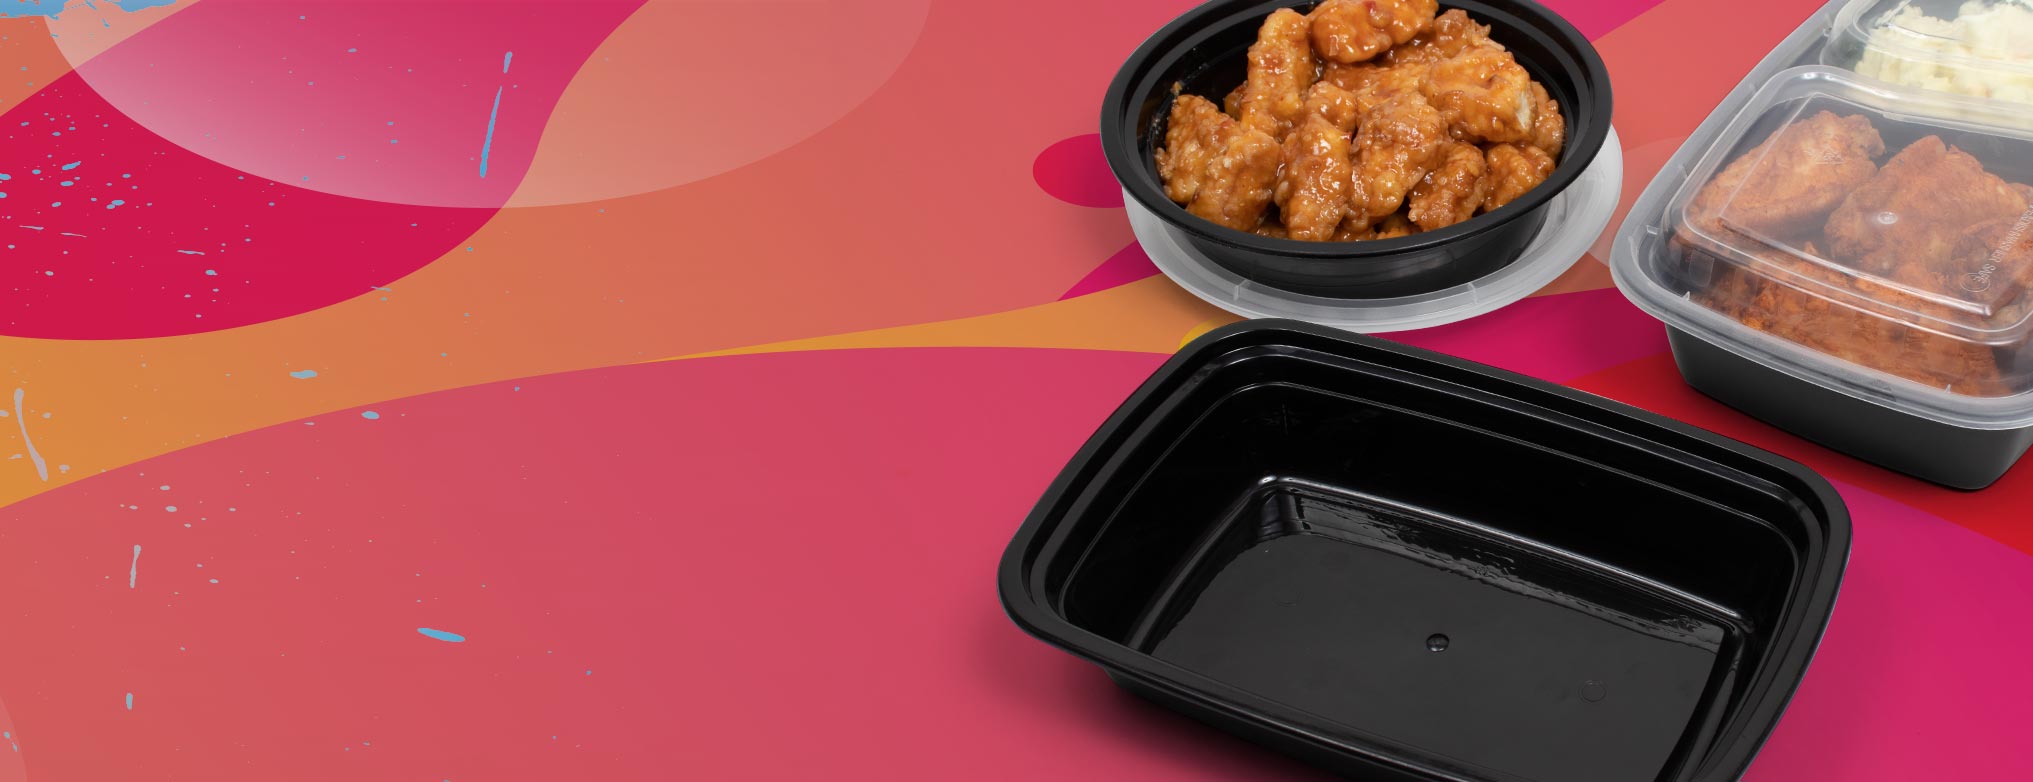 Plastic Food Takeout Containers